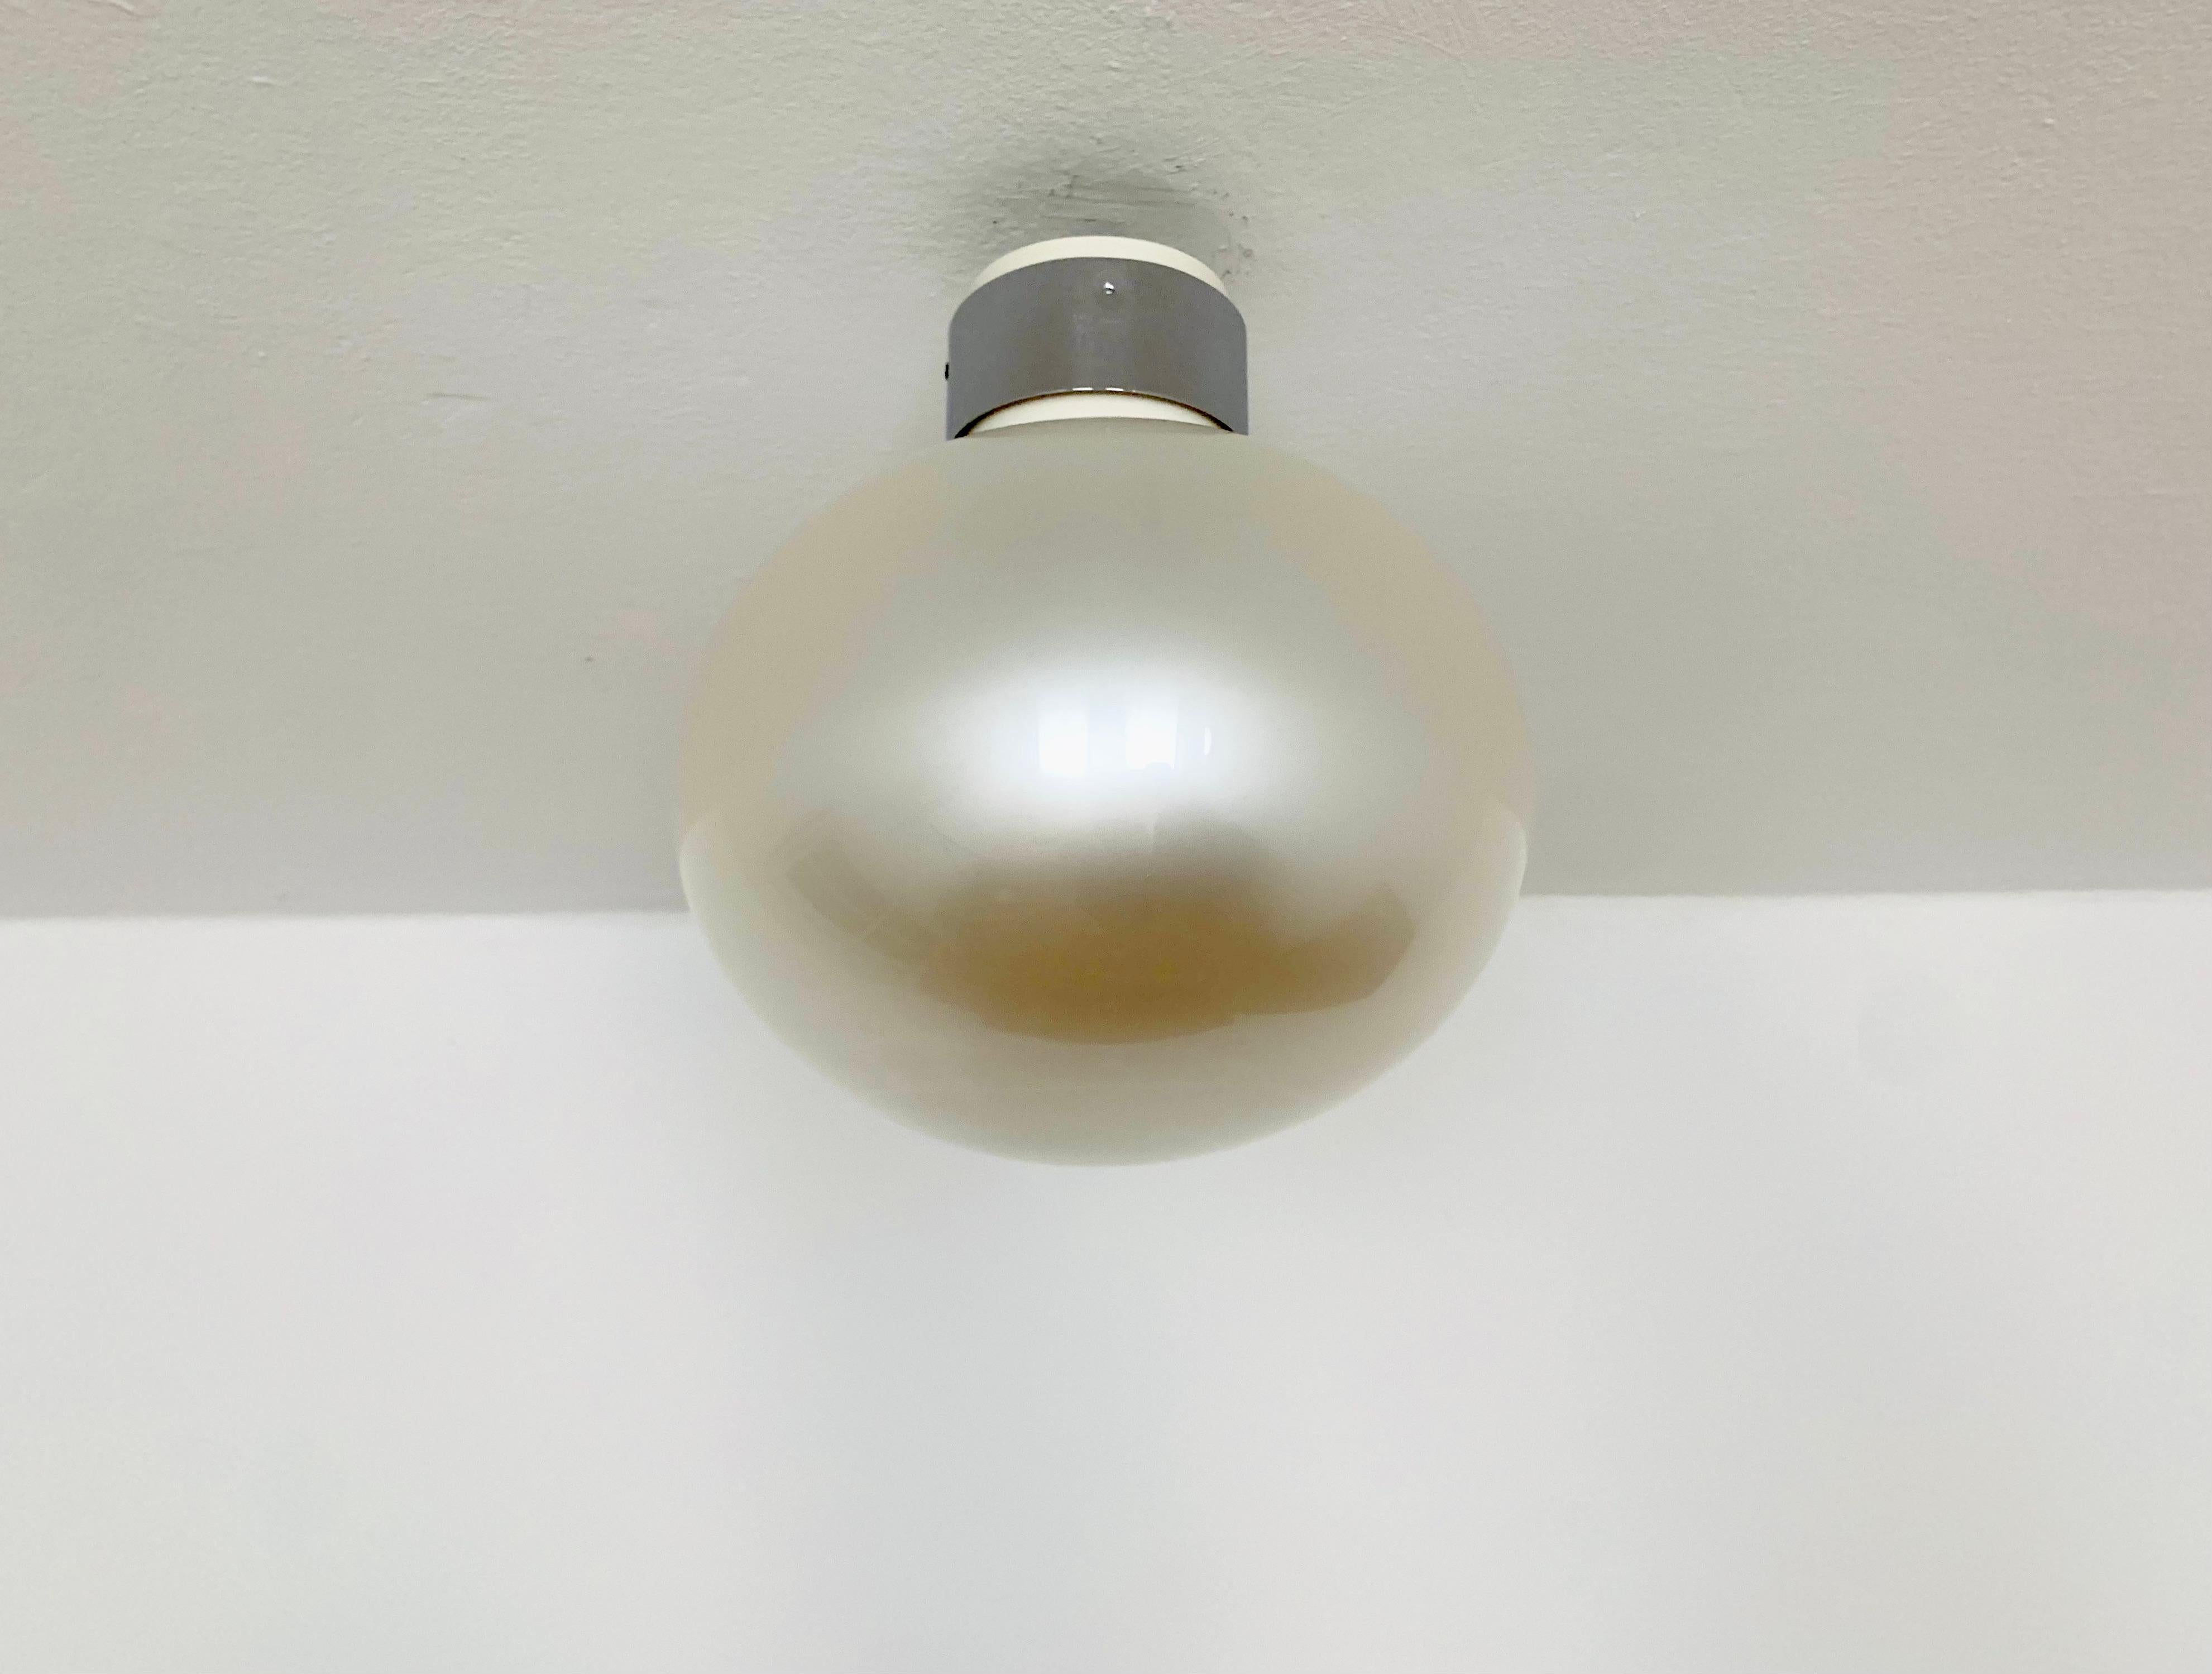 Very nice ceiling lamp from the 1970s.
Very unusual design and a real highlight for any room.
The lighting effect of the lamp is extremely beautiful.
Very high quality workmanship.
The glass design is reminiscent of the surface of a